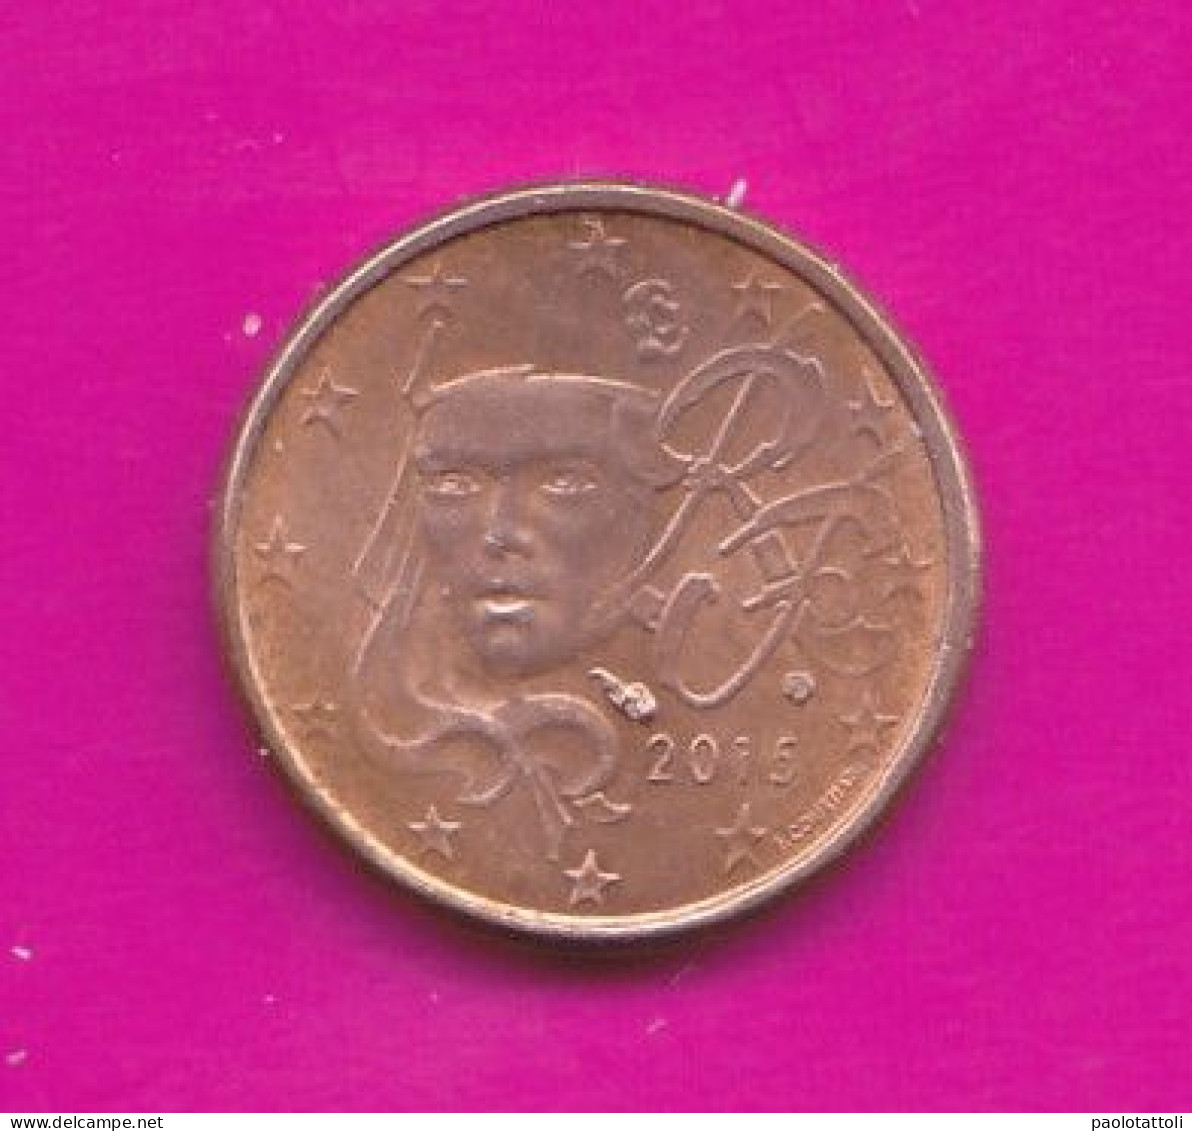 France, 2015- 1 Euro Cent- Mint Director Yves Sampoo- Copper Plated Steel- Obverse Marianne De Courtiade. - France